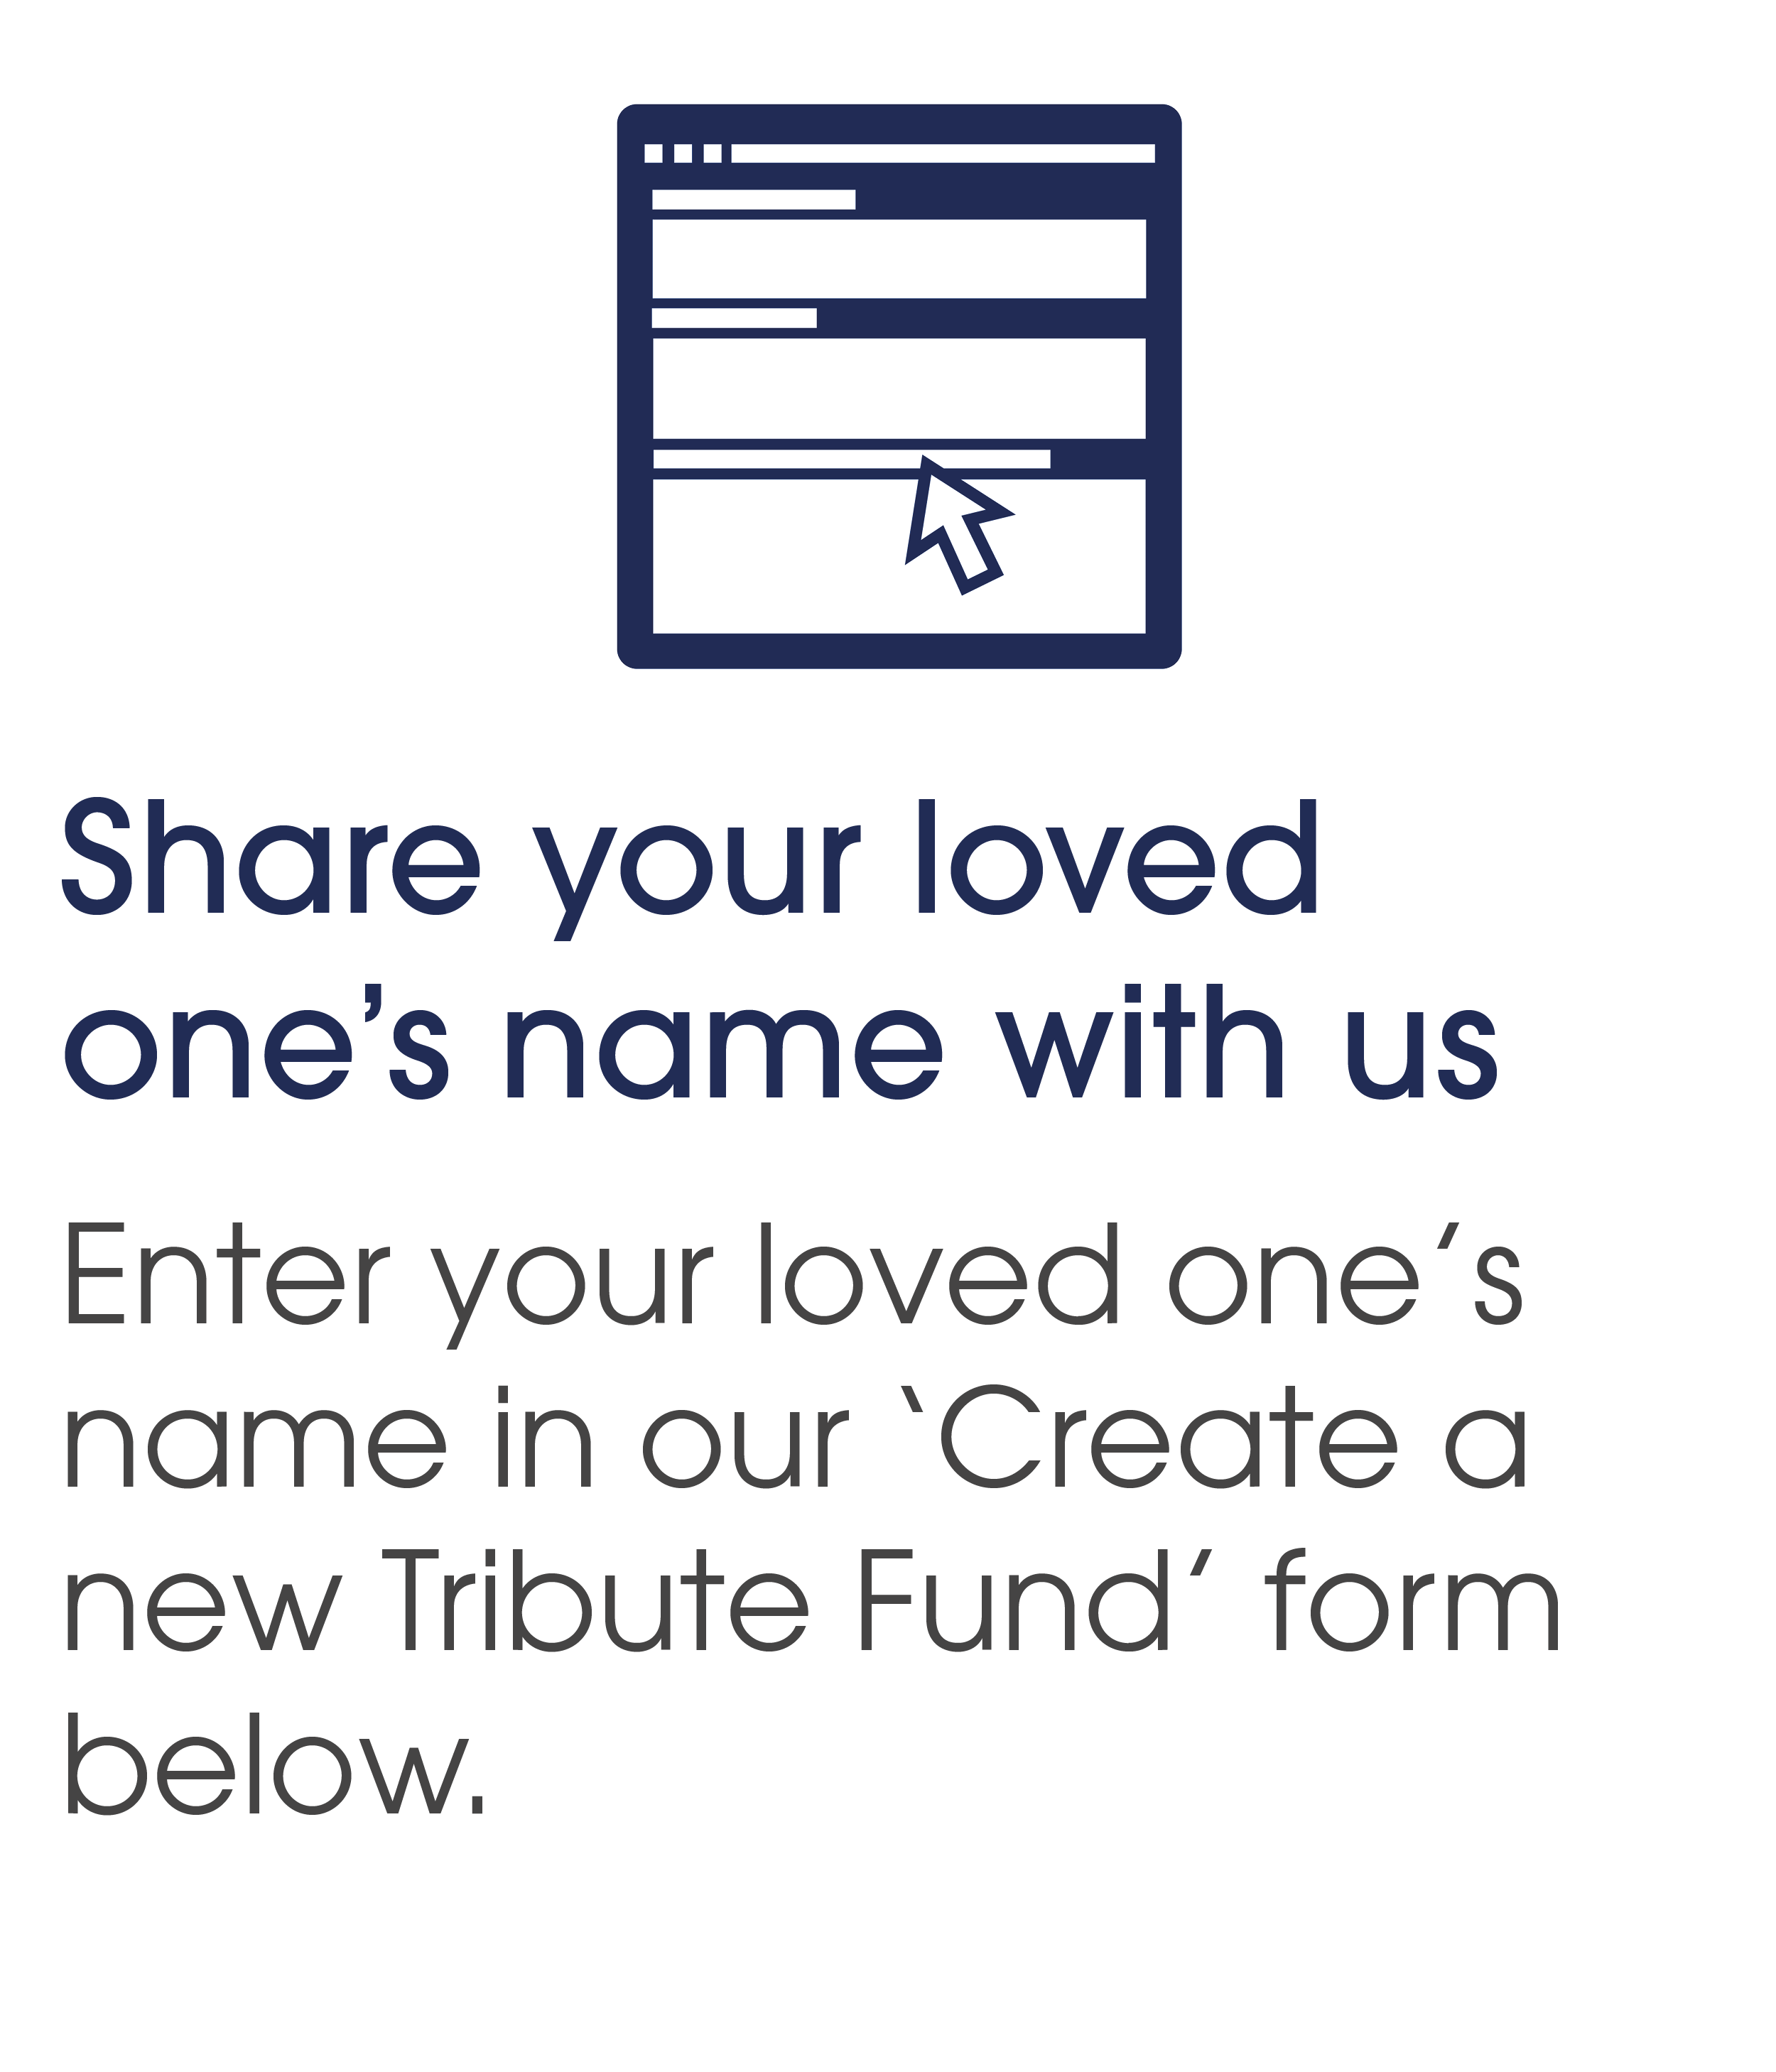 Share your loved one's name with us by entering it in our 'Create a Tribute Fund' form below